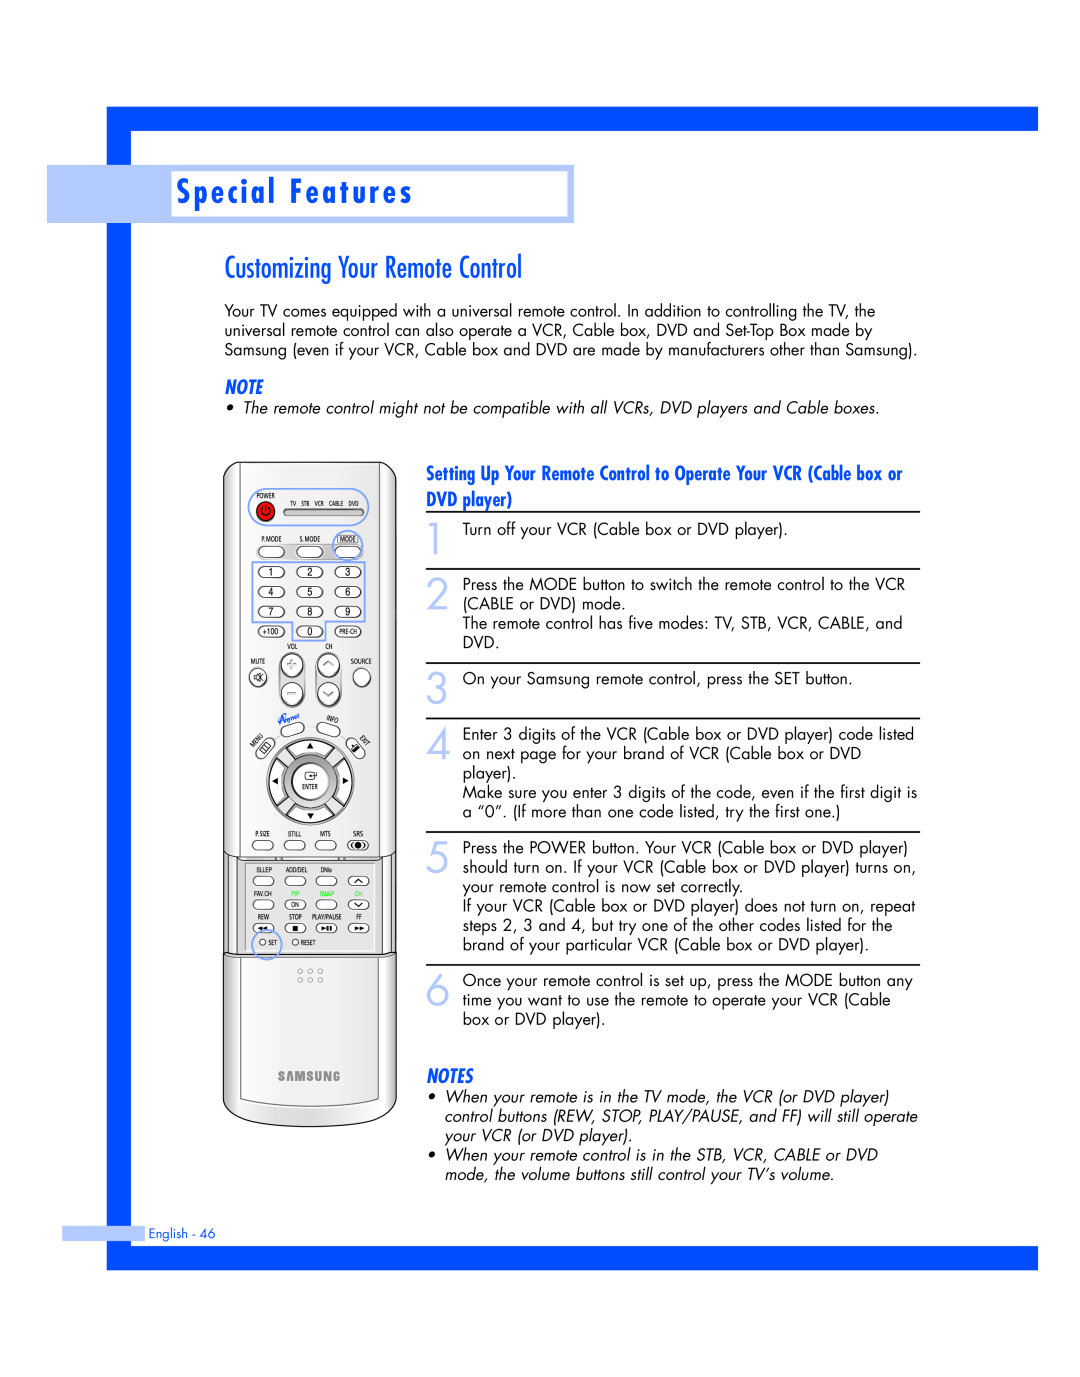 Samsung HL-P4674W instruction manual Special Features, Customizing Your Remote Control, DVD player 